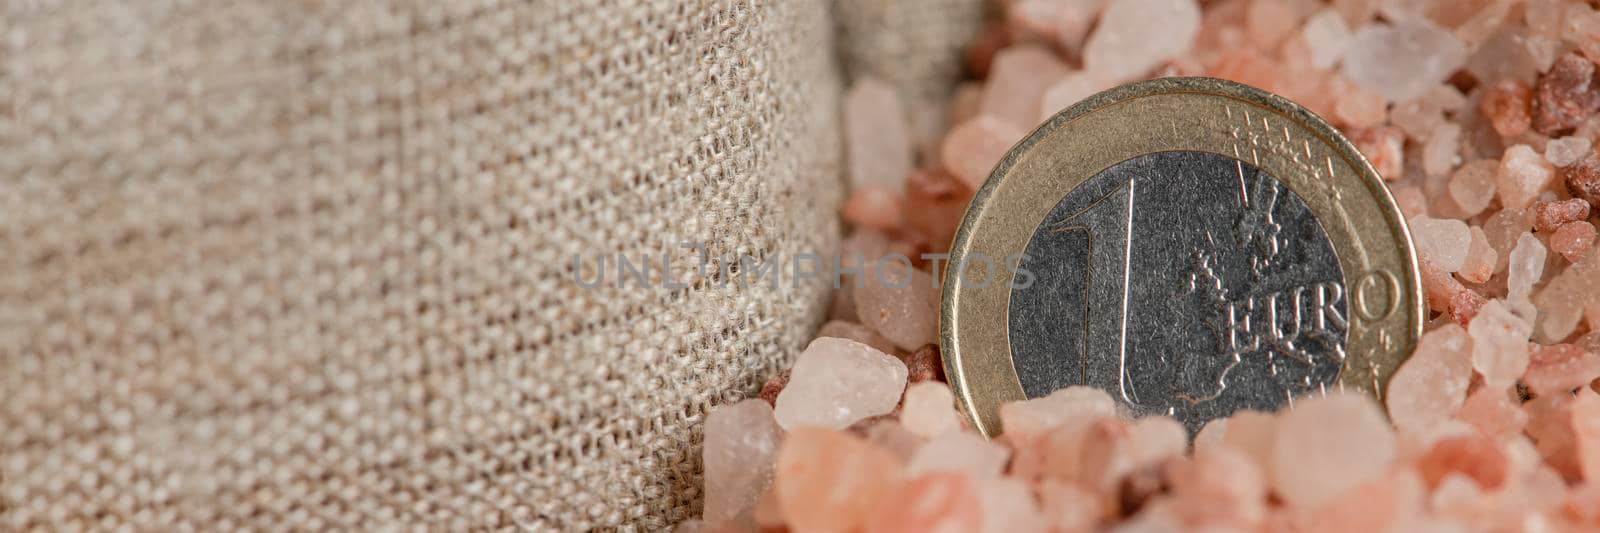 Salt price. Large crystals of pink Himalayan salt, close-up. A coin in a pile of salt as a symbol of rising prices. by SERSOL